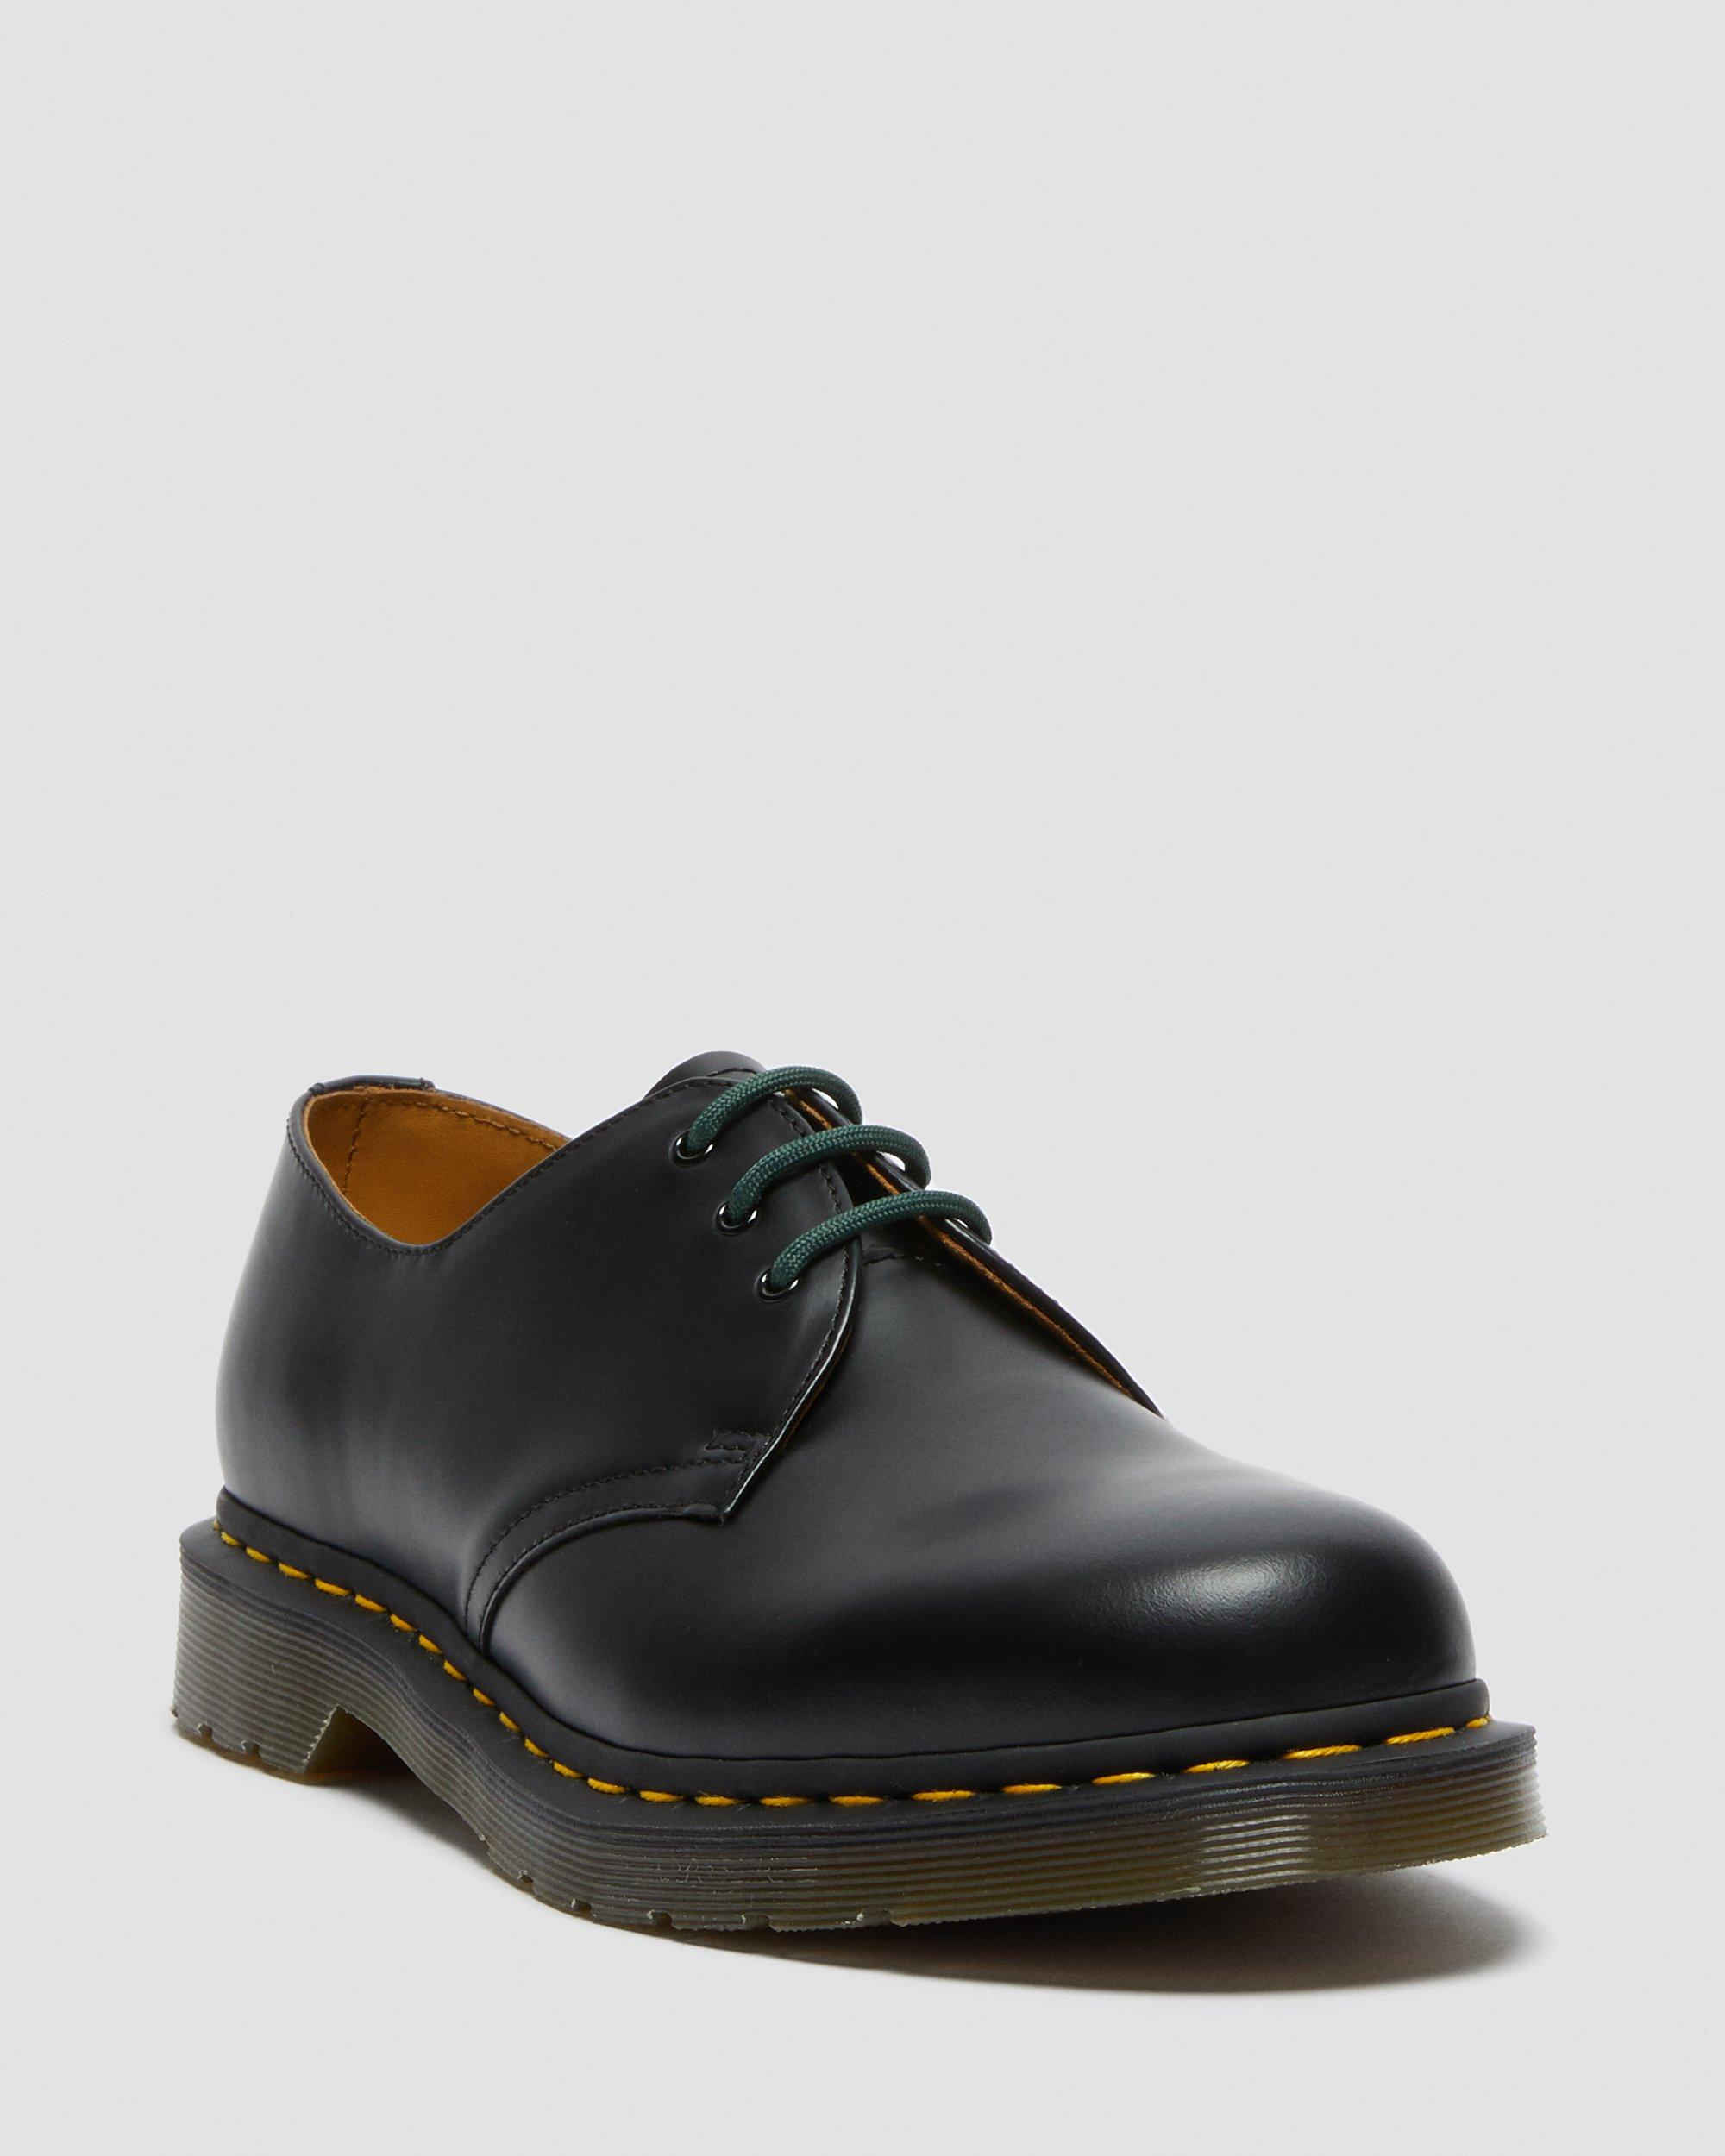 1461 Women's Leather Oxford Shoes Dr.